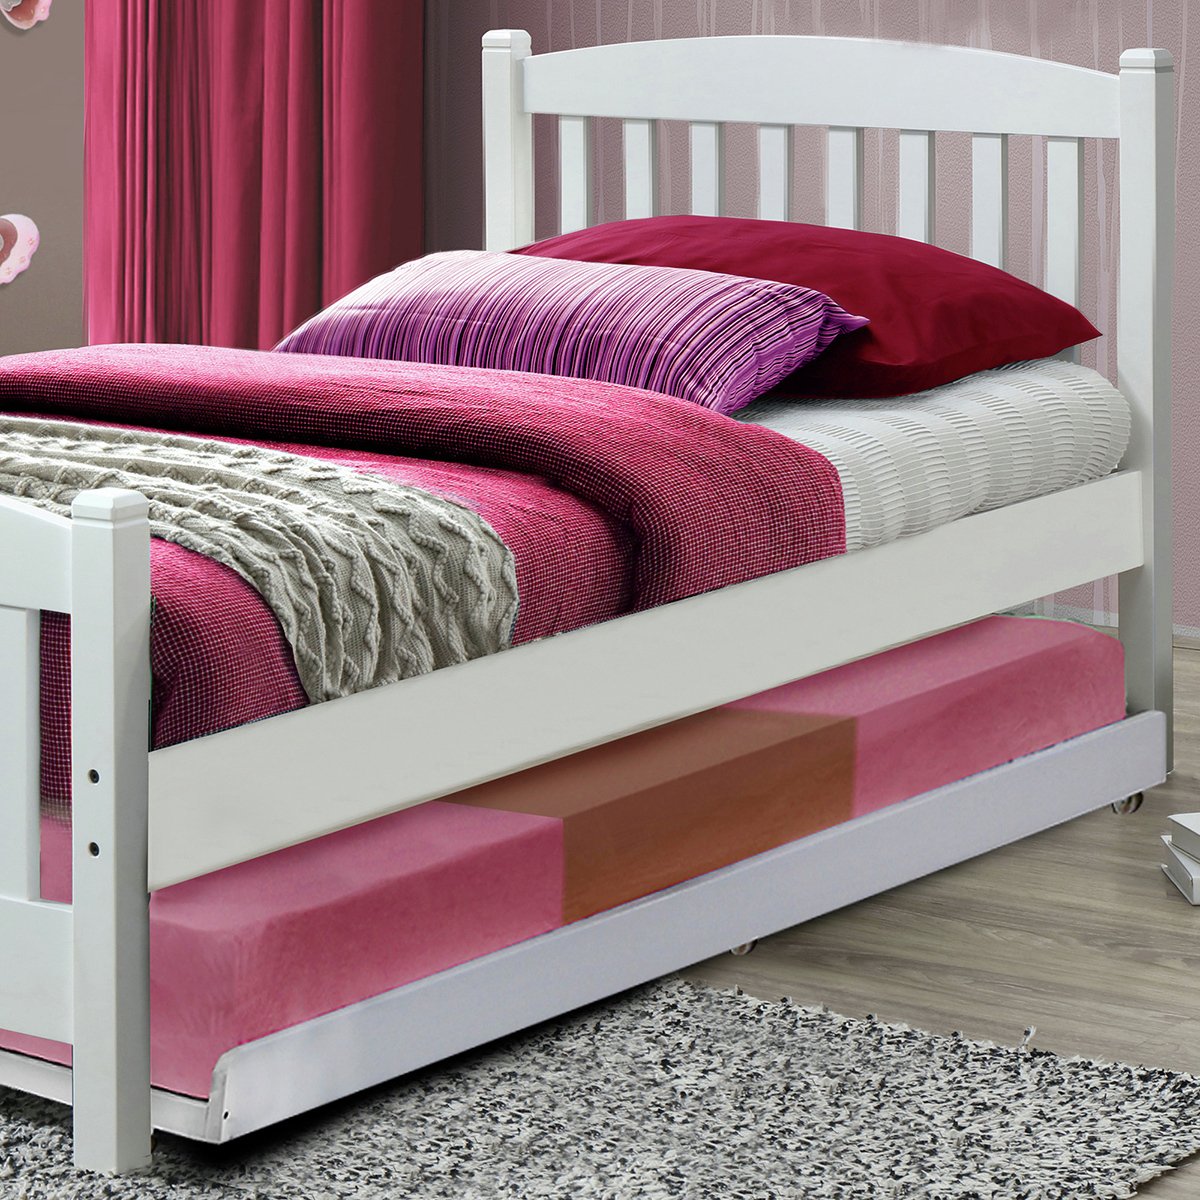 Snowy Single Bed Frame with Trundle Review